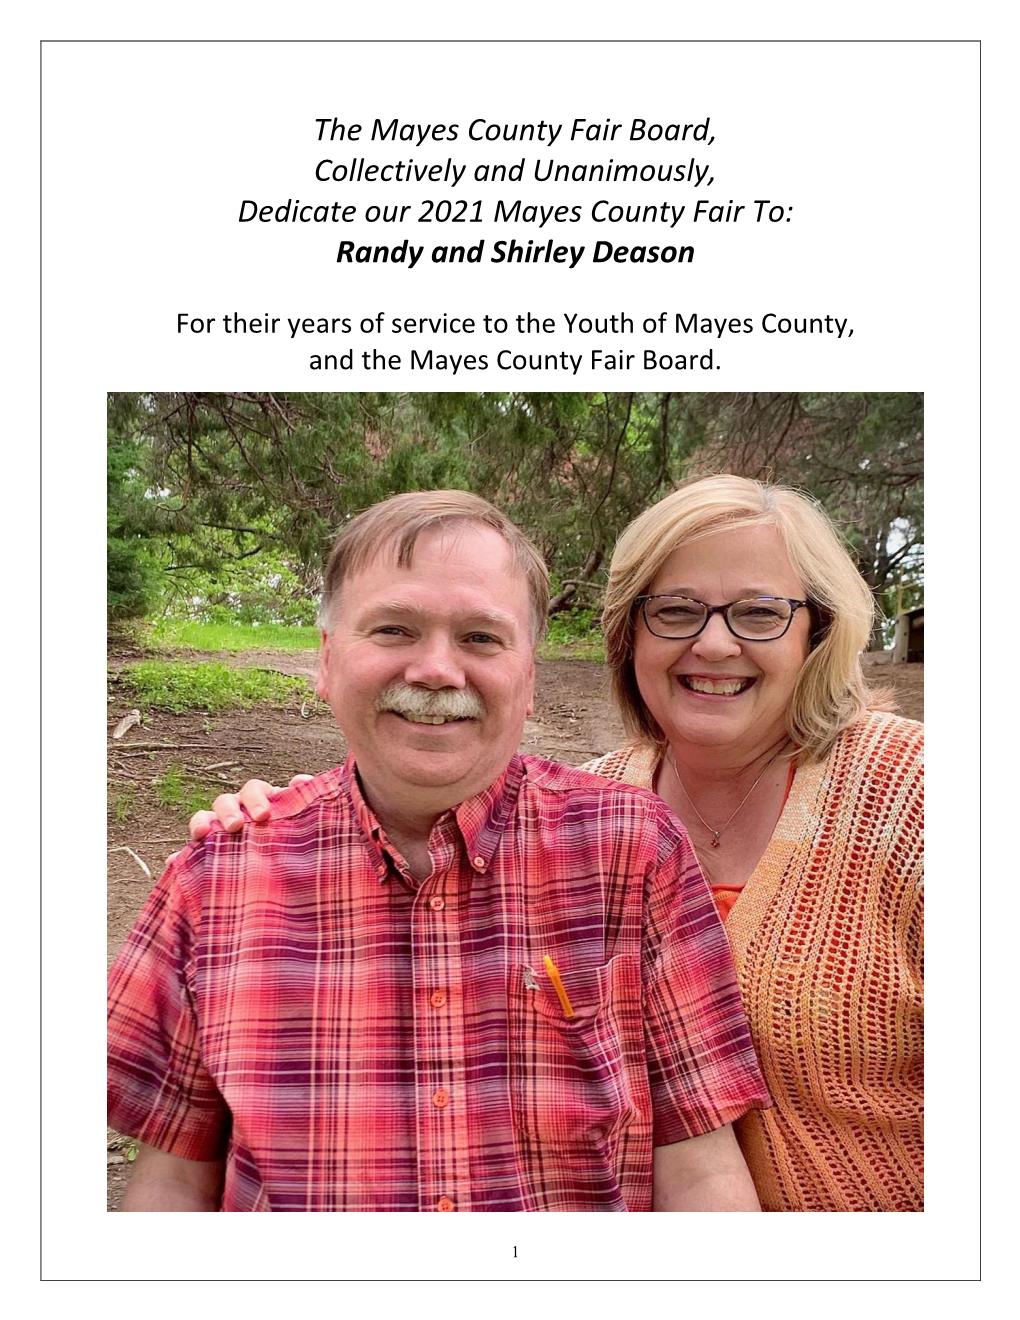 The Mayes County Fair Board, Collectively and Unanimously, Dedicate Our 2021 Mayes County Fair To: Randy and Shirley Deason